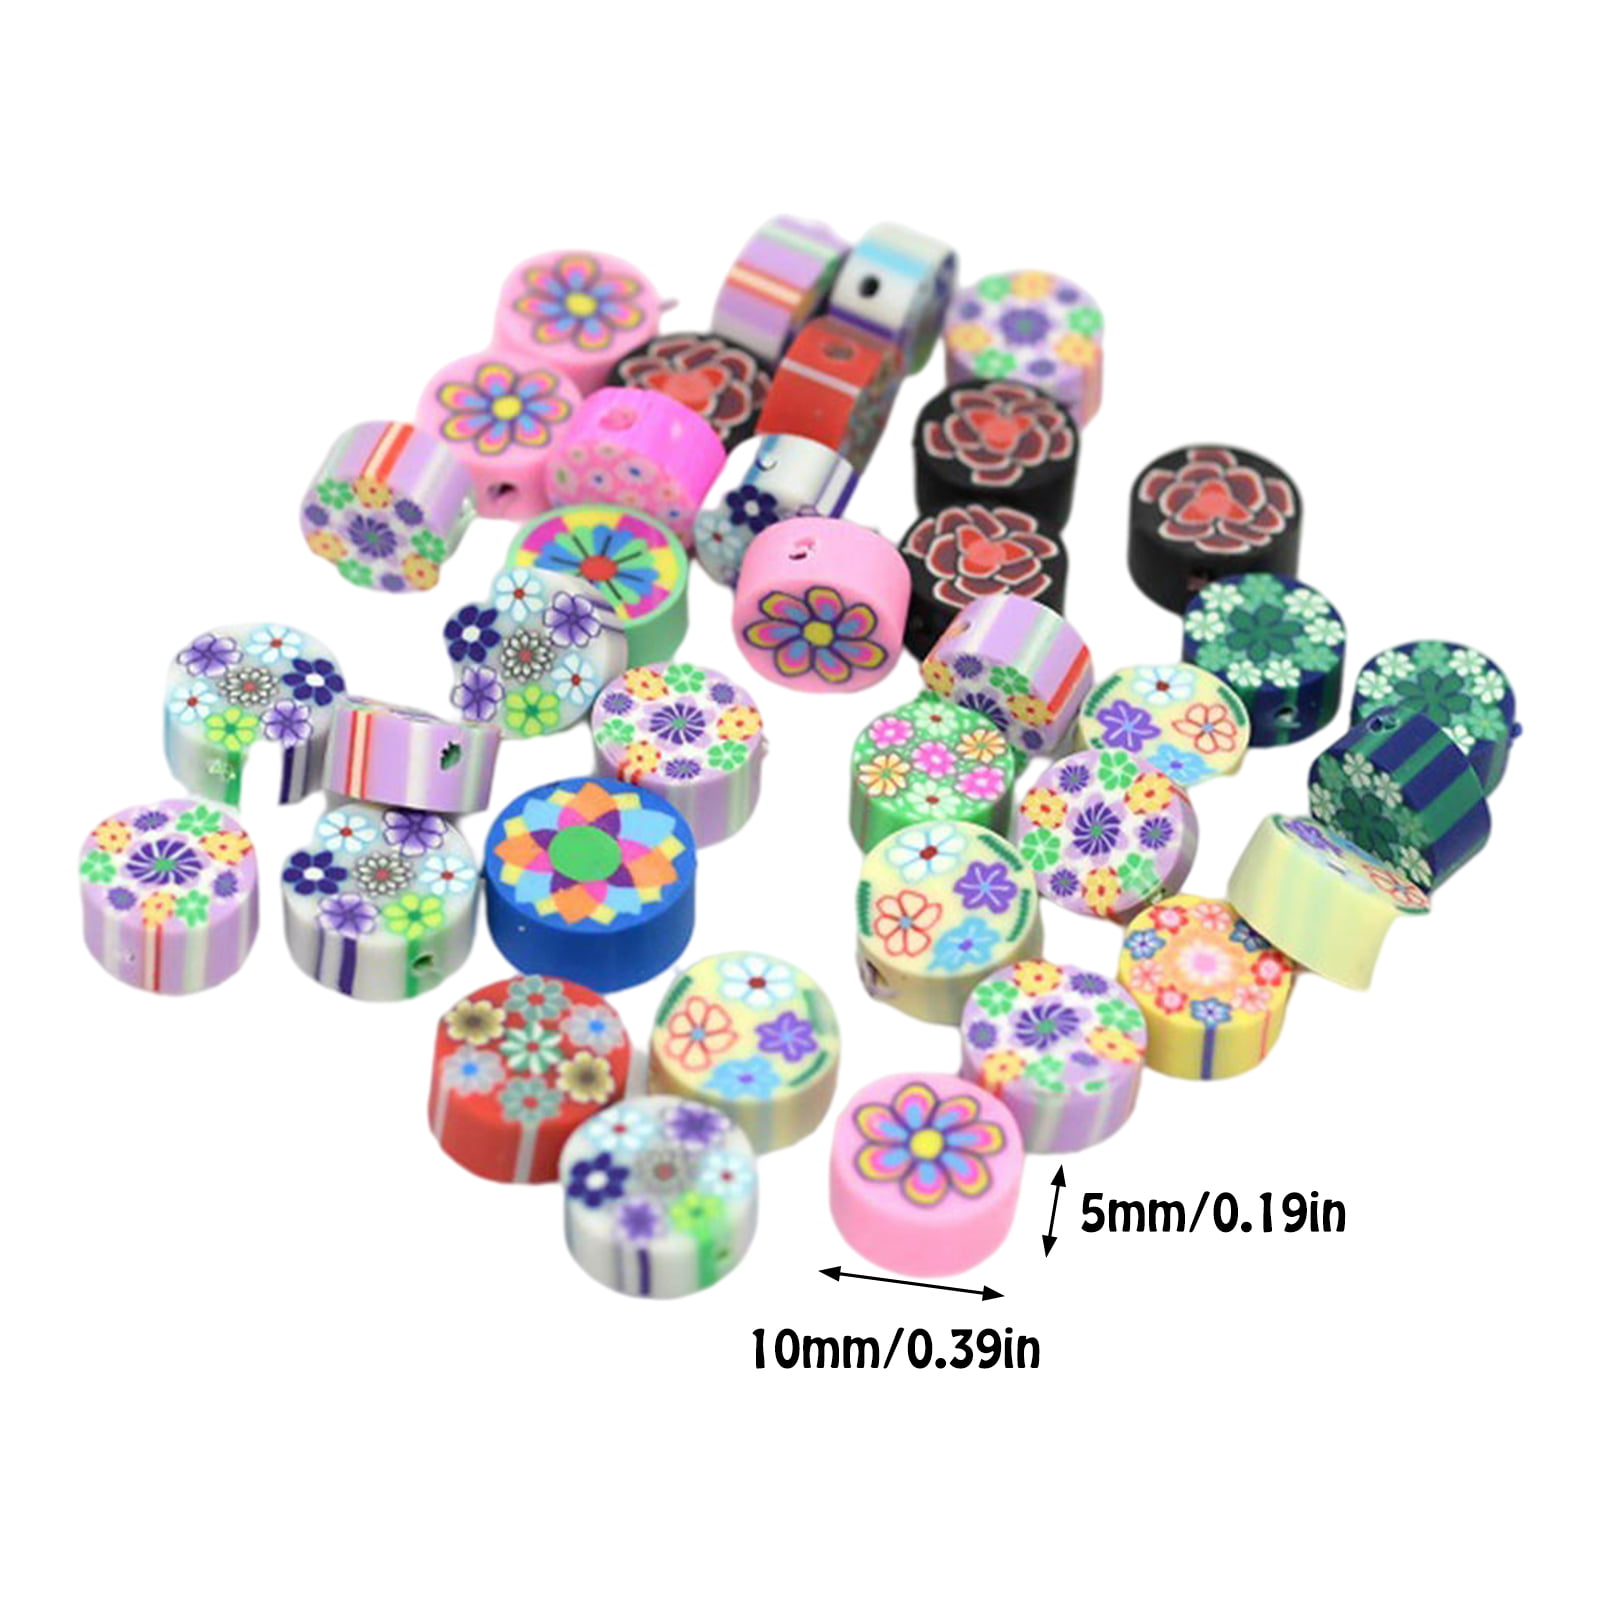 100 Pcs mixed fimo Polymer Clay Fruit Spacer Beads 10mm